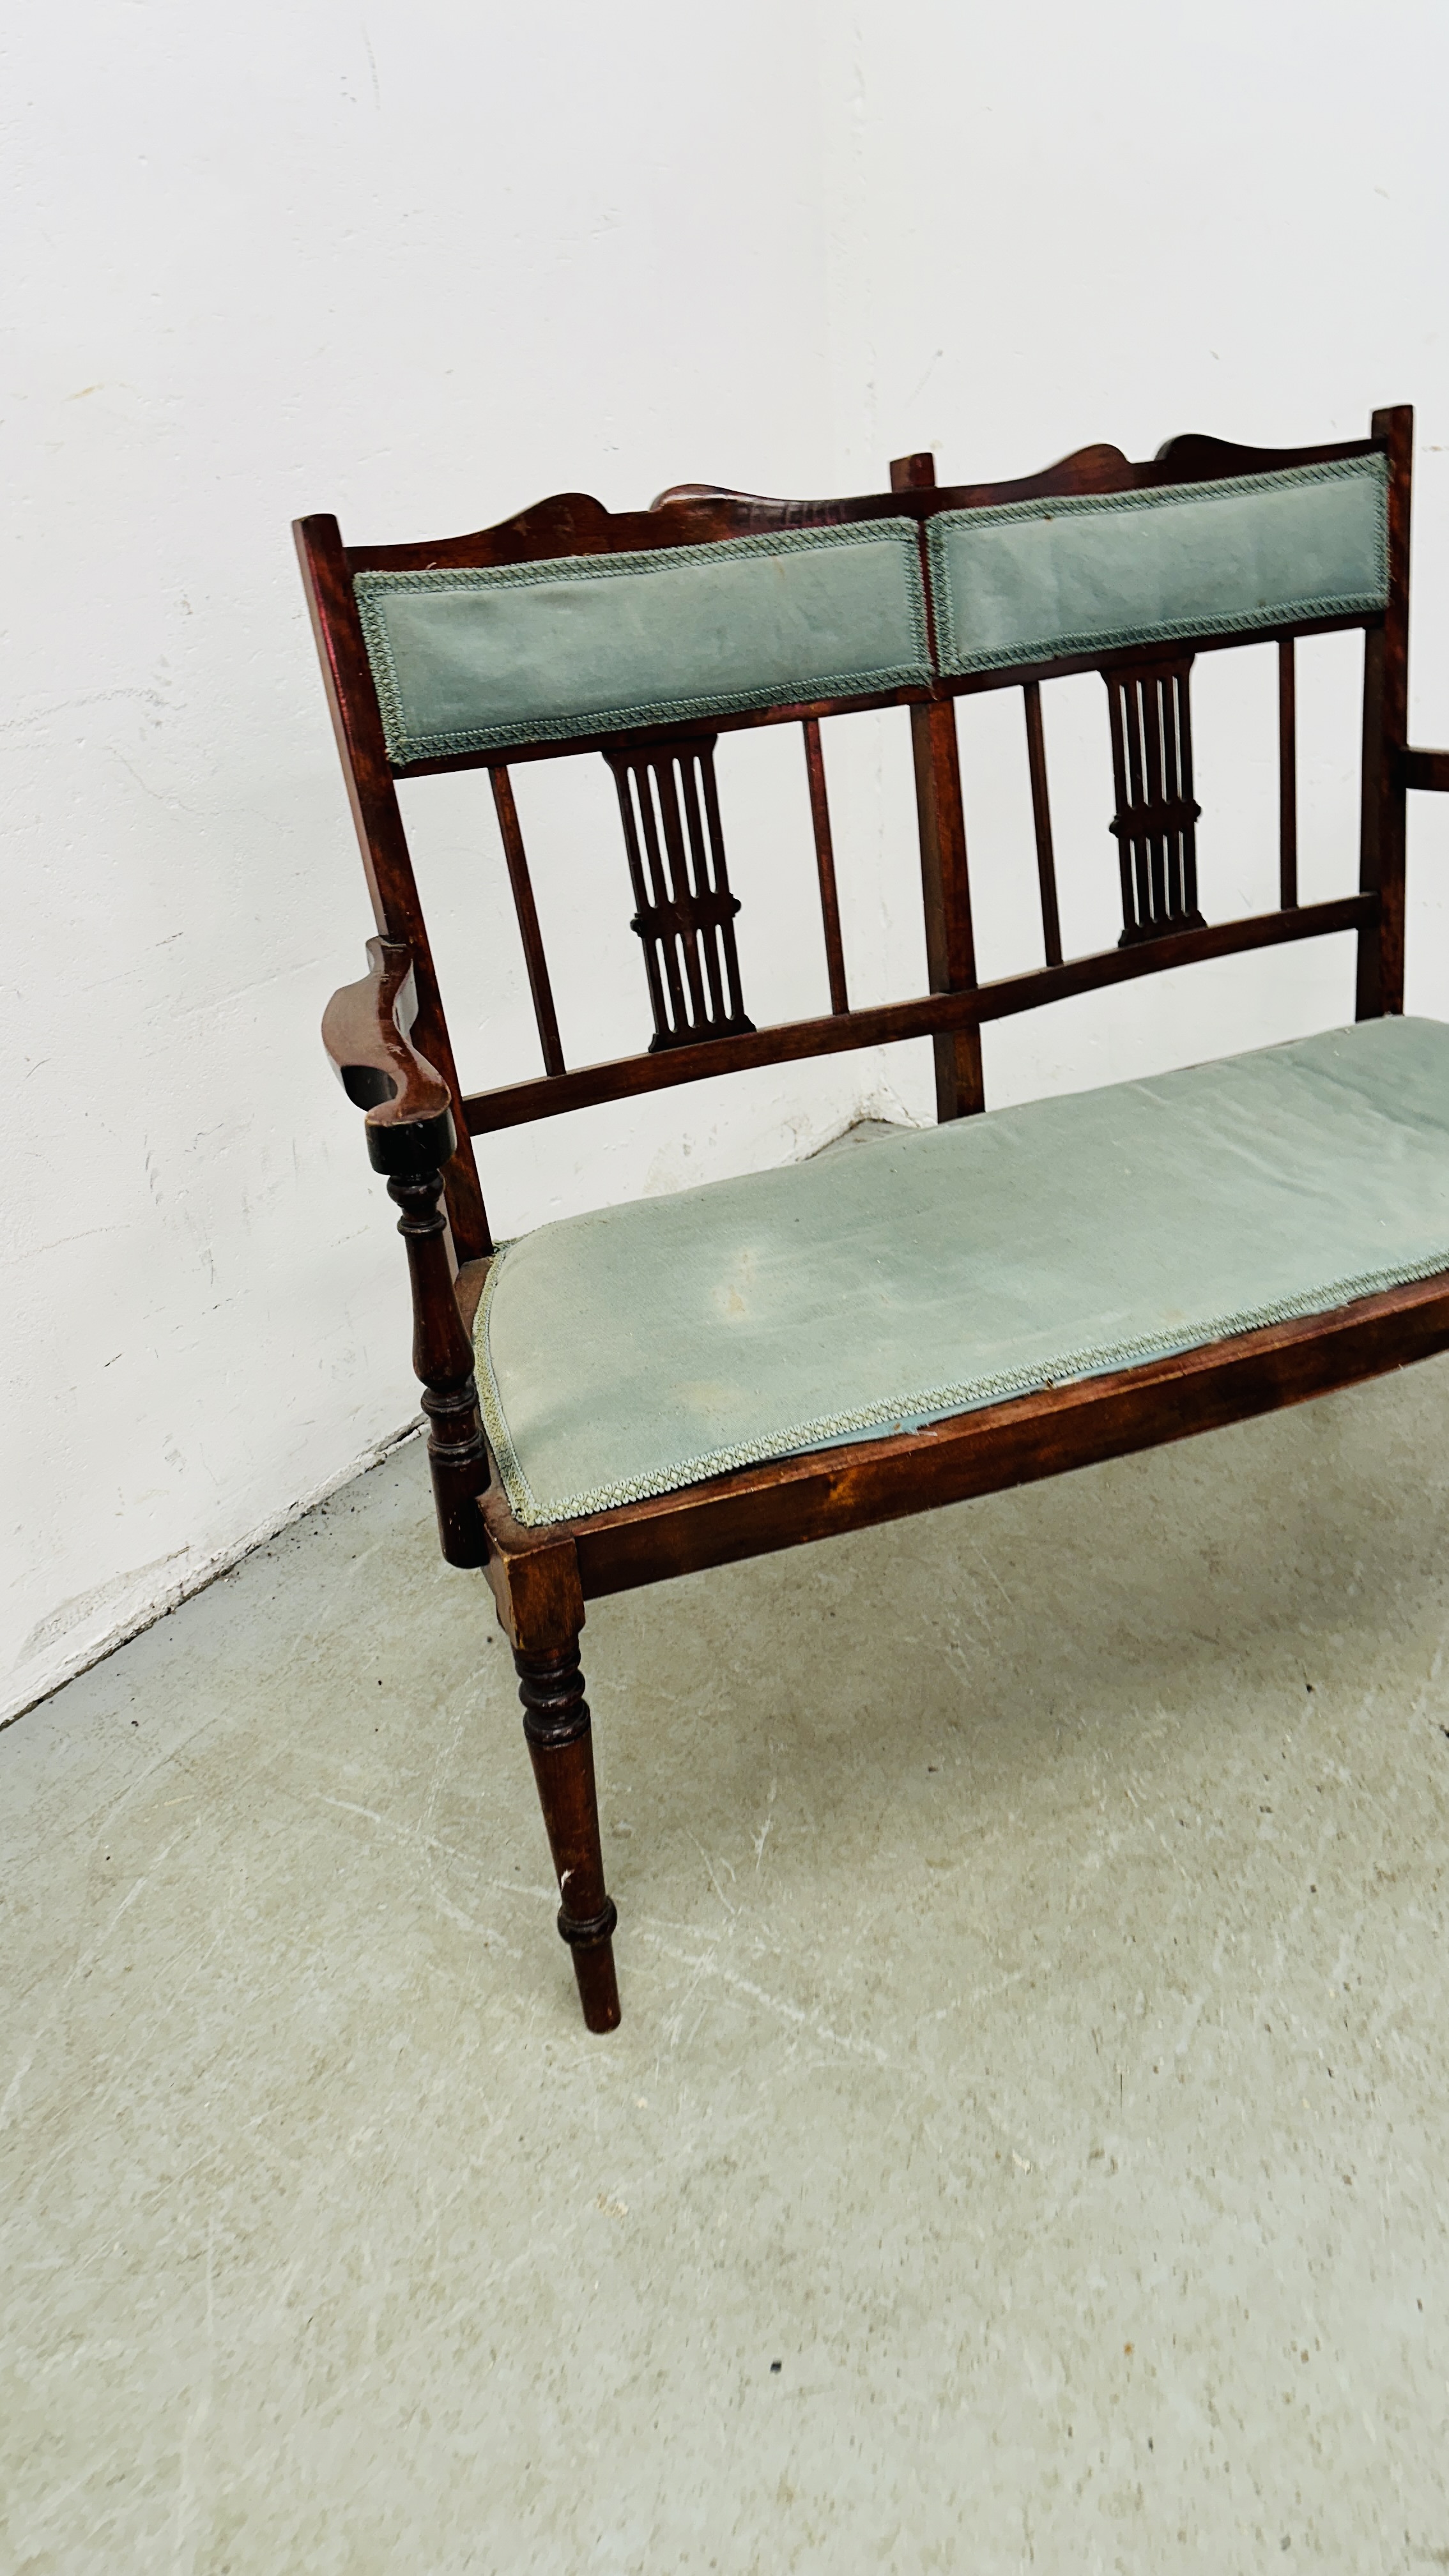 EDWARDIAN MAHOGANY 2 SEAT SOFA WITH FRETT WORK SUPPORT BACK AND GREEN UPHOLSTERY. - Image 3 of 11